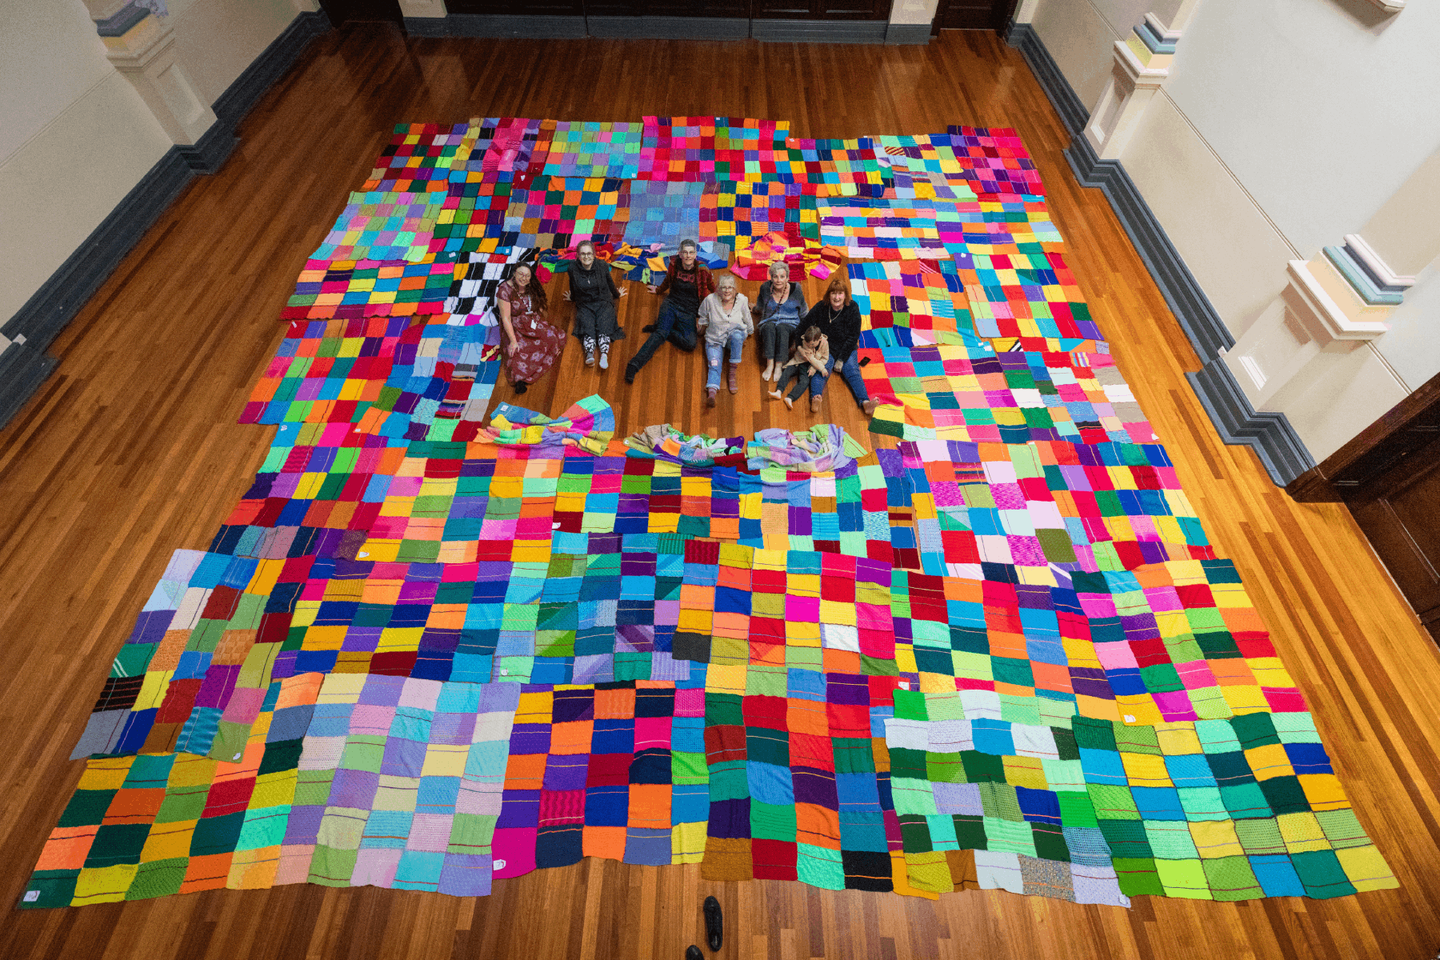 People sitting in the middle of colourful blankets spread across a wooden floor